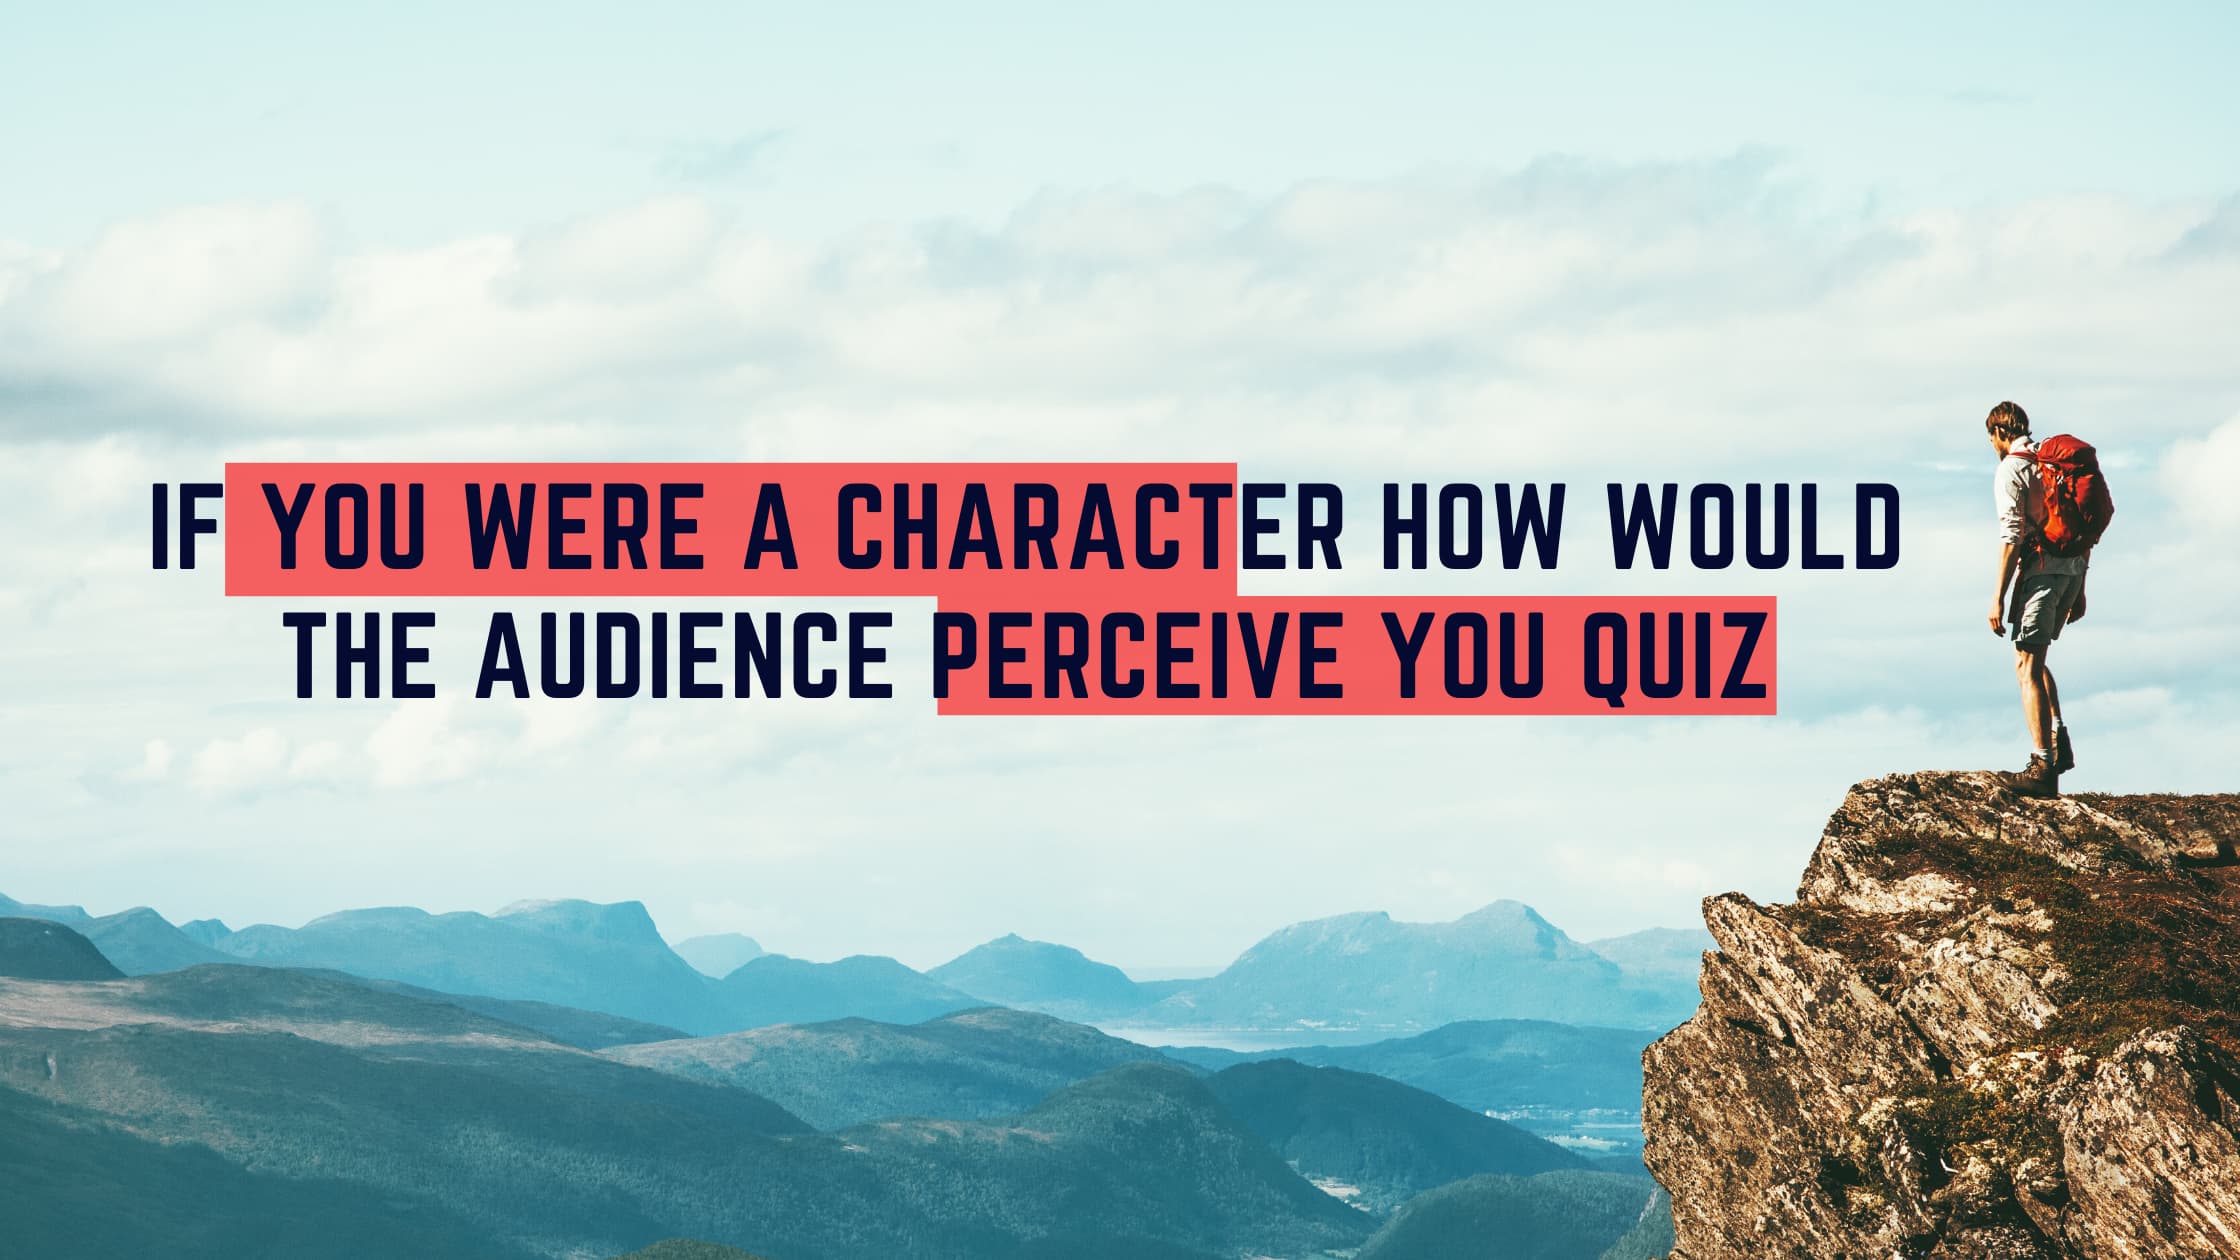 If you were a character how would the audience perceive you quiz